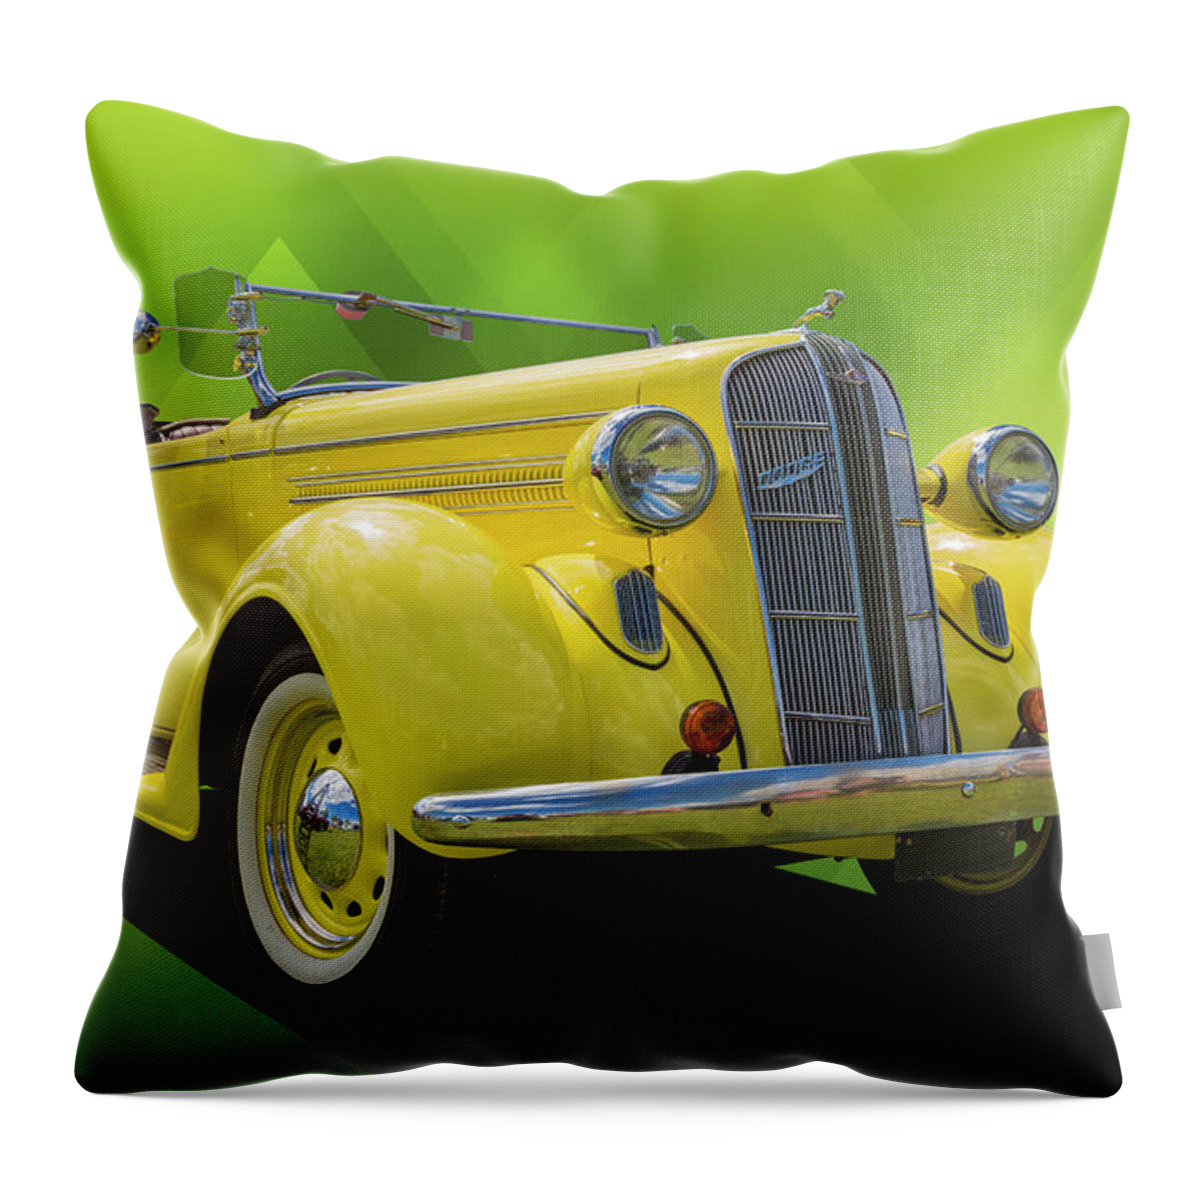 Car Throw Pillow featuring the photograph Convertible Dodge by Keith Hawley